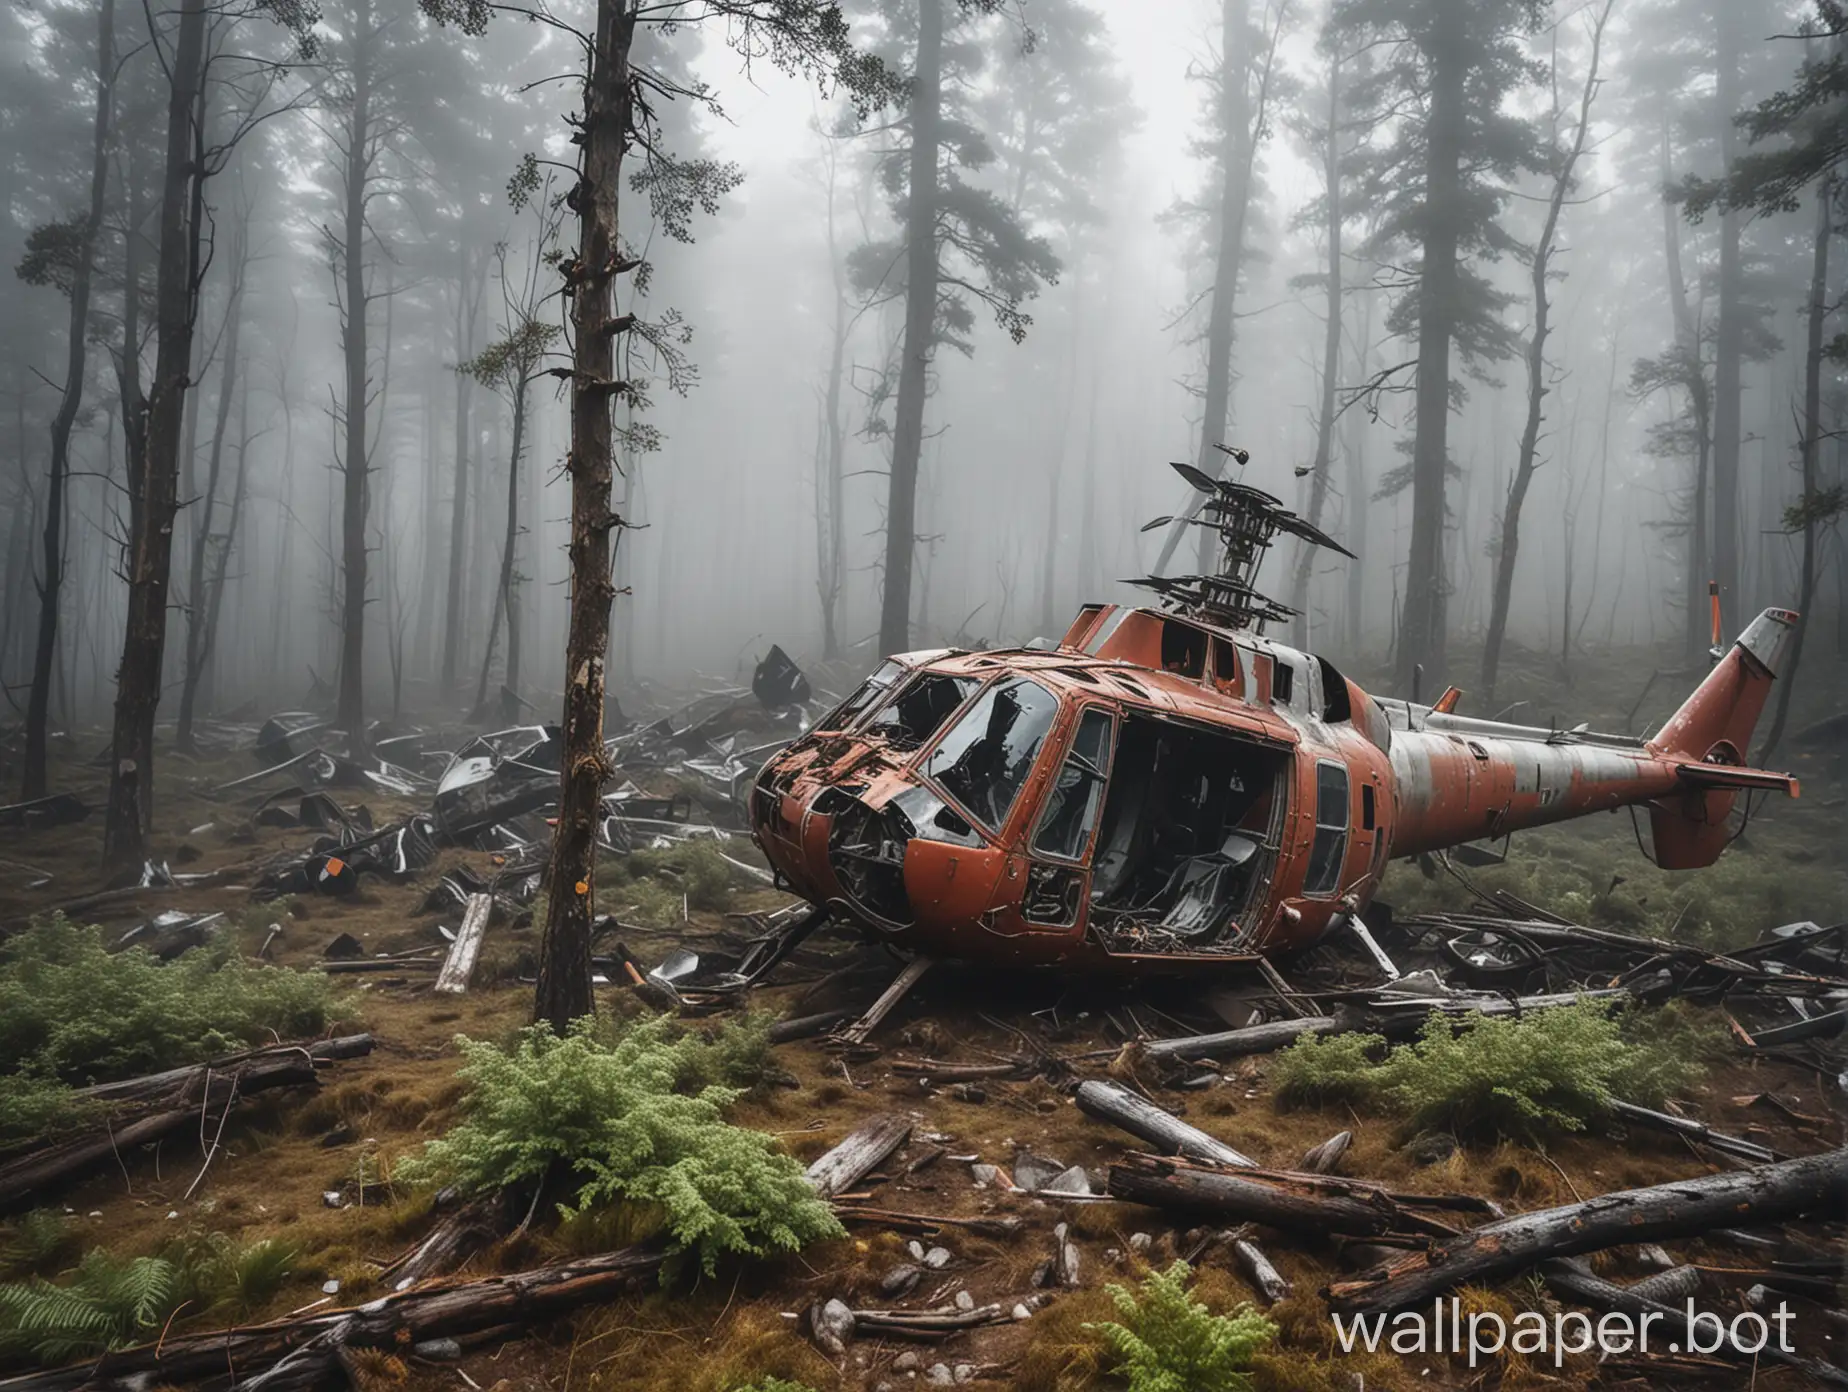 Helicopter-Debris-in-Mountain-Fog-Wreck-Metal-Amidst-Trees